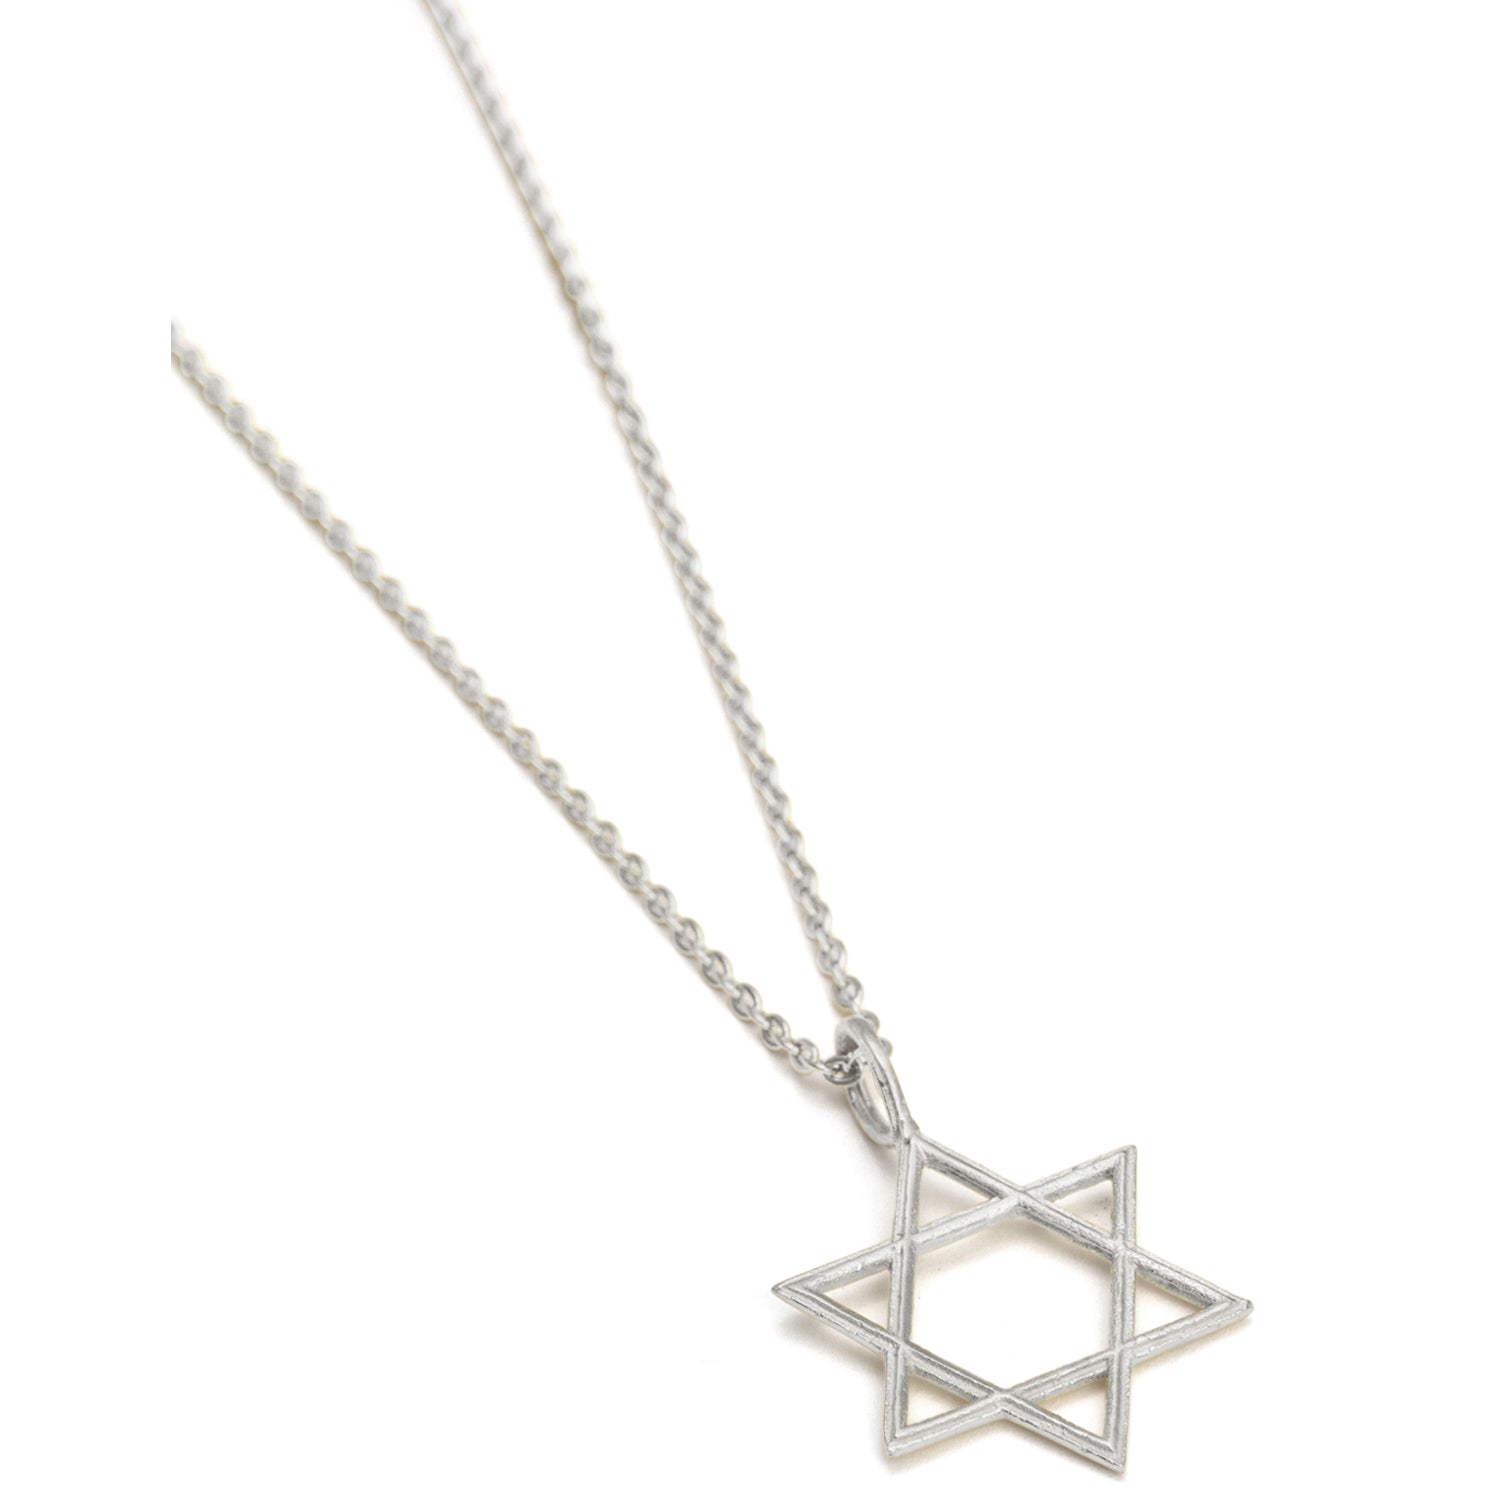 Hexagram pendant made of high-quality sterling silver from ETERNAL BLISS